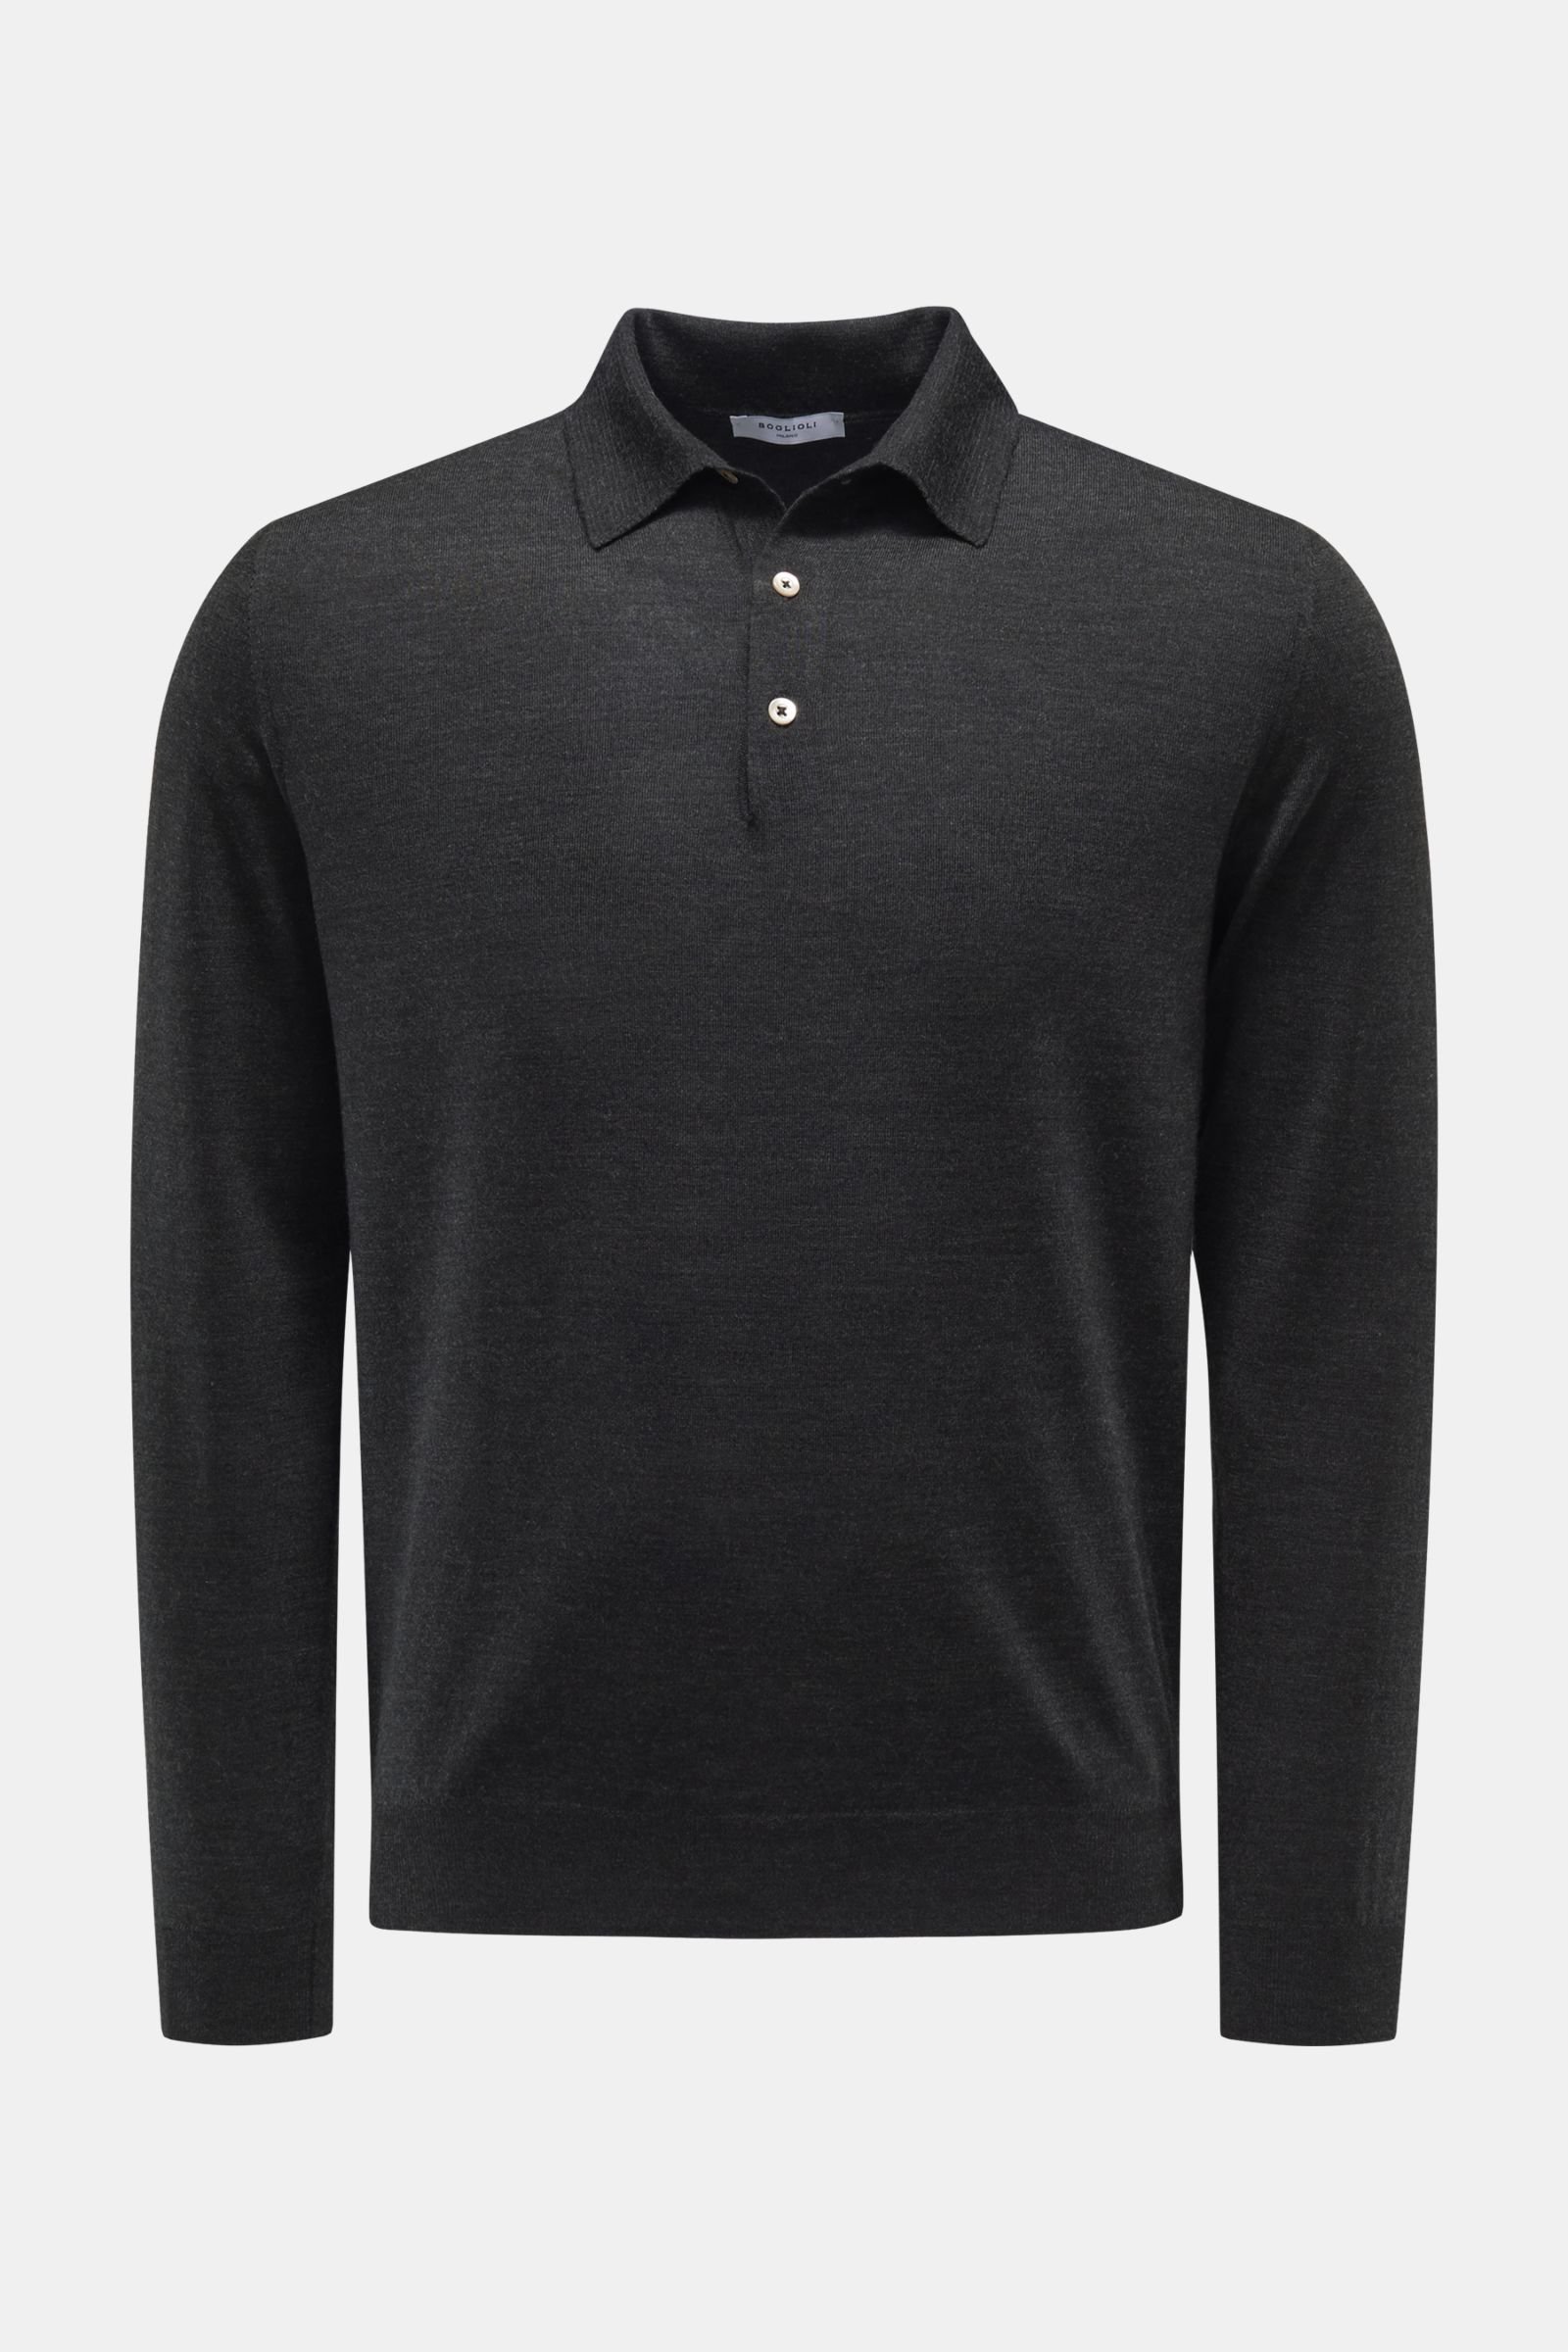 Knit polo shirt anthracite